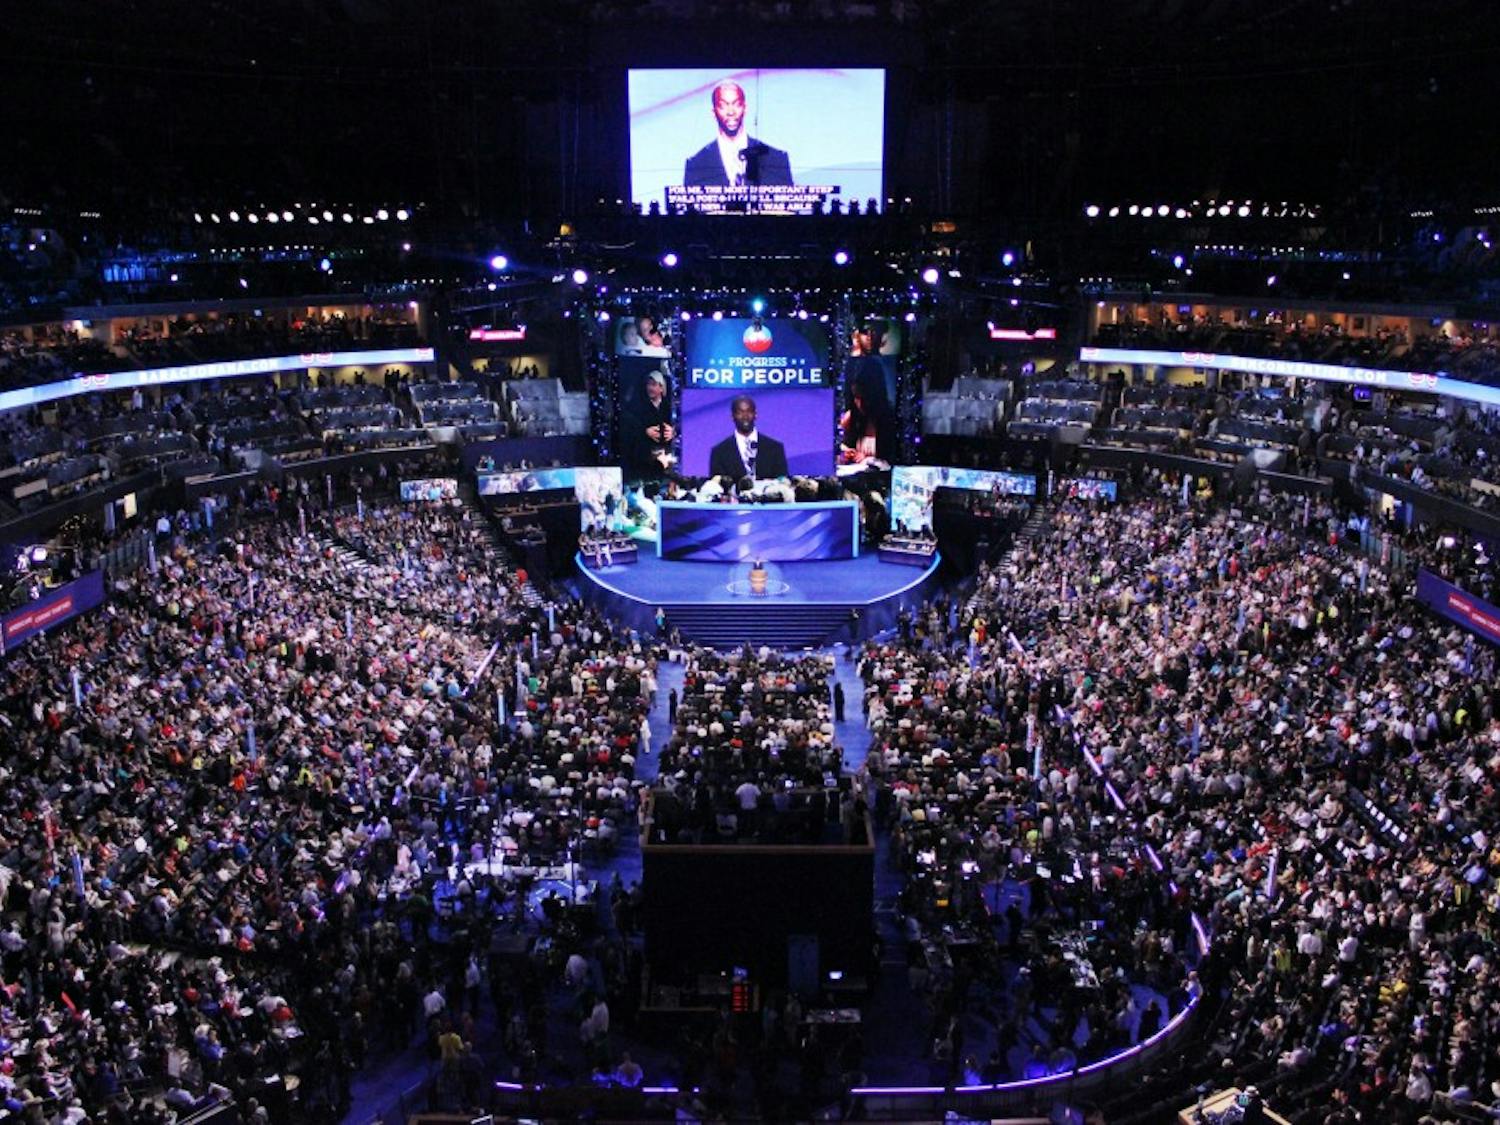 The Democratic National Convention draws thousands of delegates, press, and citizens to Charlotte in Sept. 2012.